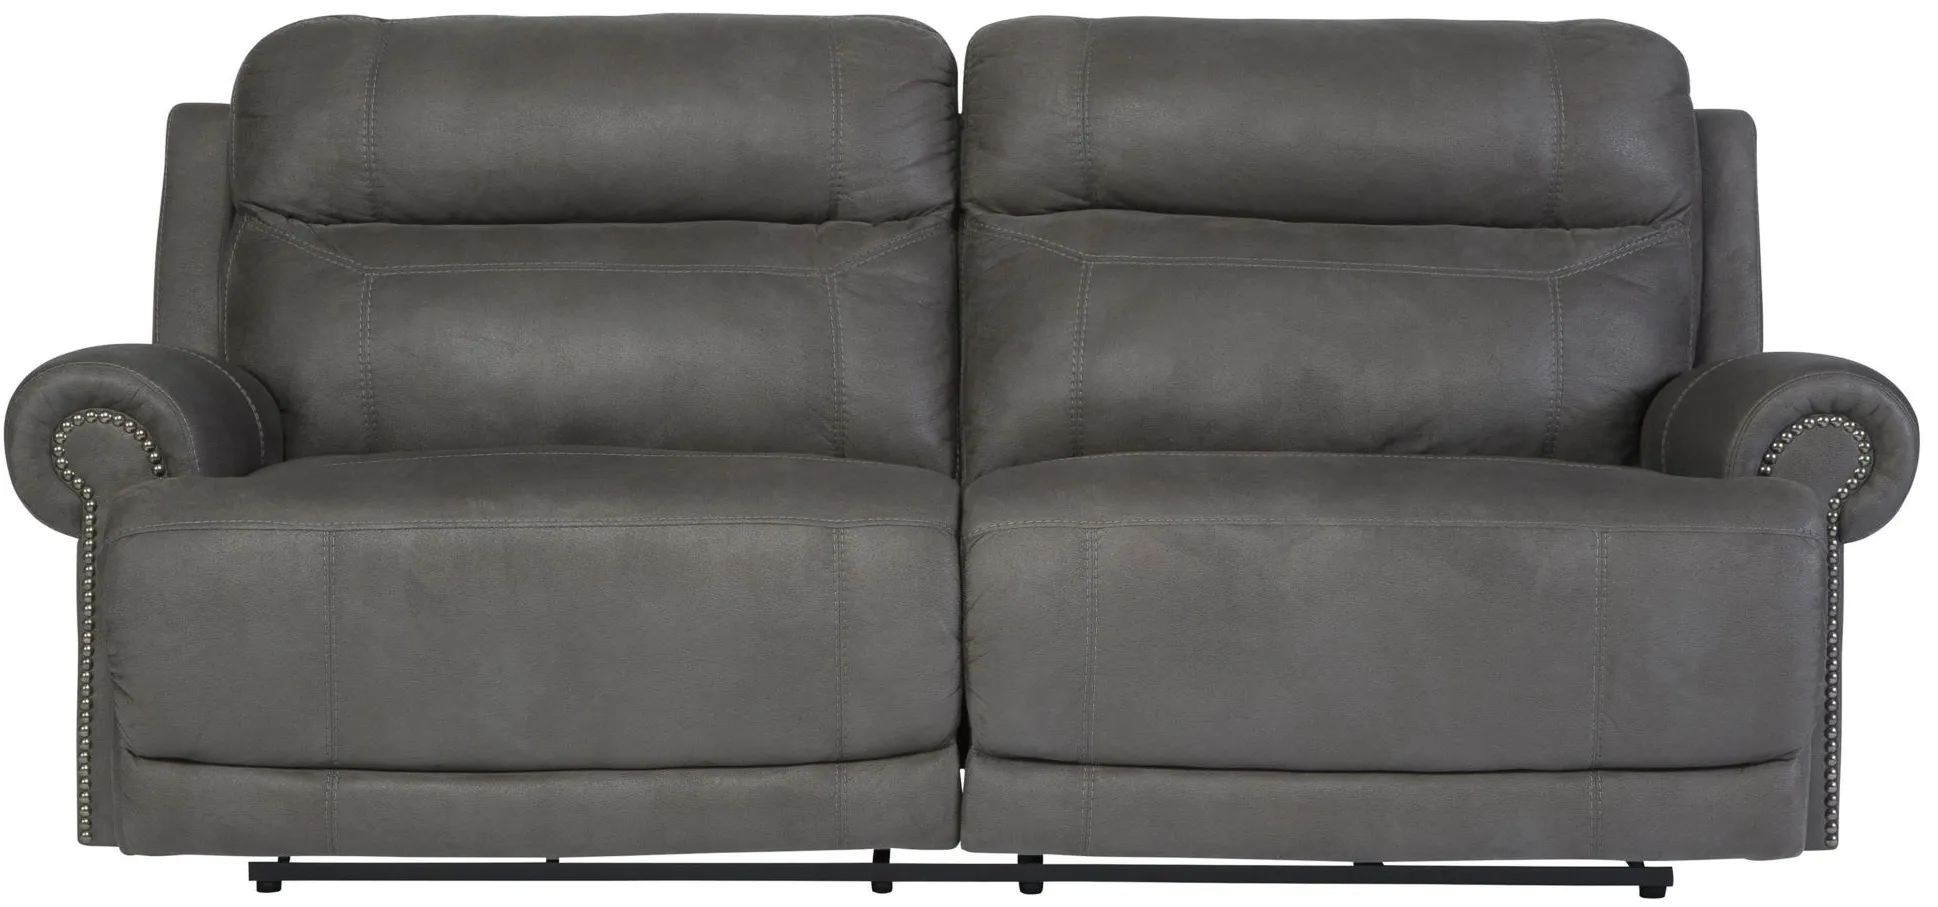 Romilly Reclining Sofa in Gray by Ashley Furniture